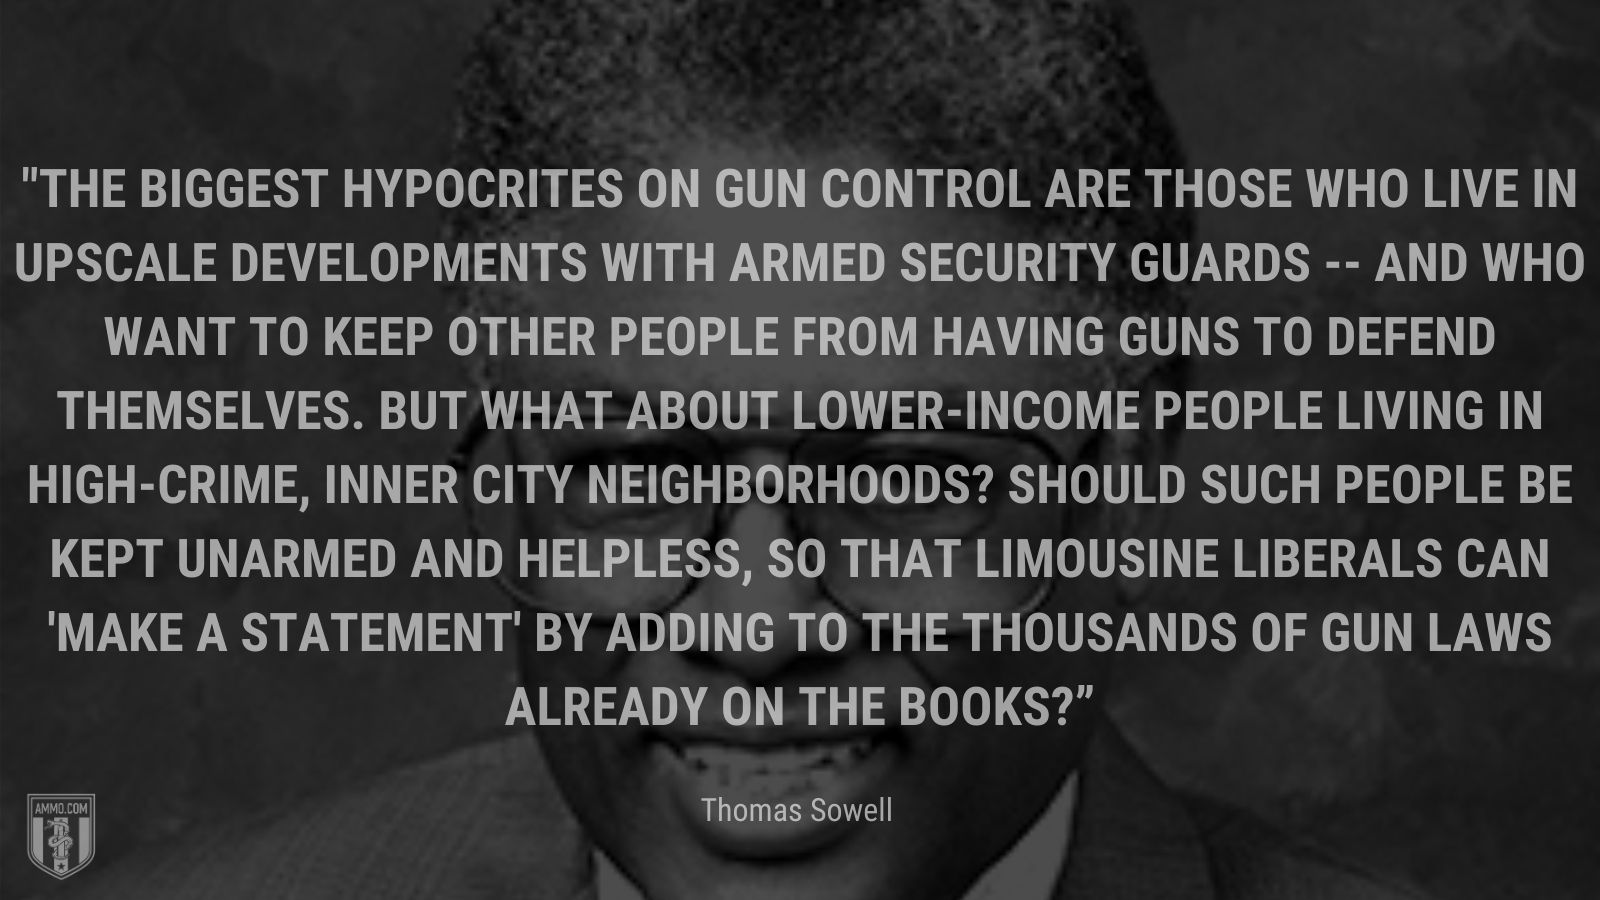 “The biggest hypocrites on gun control are those who live in upscale developments with armed security guards -- and who want to keep other people from having guns to defend themselves. But what about lower-income people living in high-crime, inner city neighborhoods? Should such people be kept unarmed and helpless, so that limousine liberals can 'make a statement' by adding to the thousands of gun laws already on the books?” - Thomas Sowell